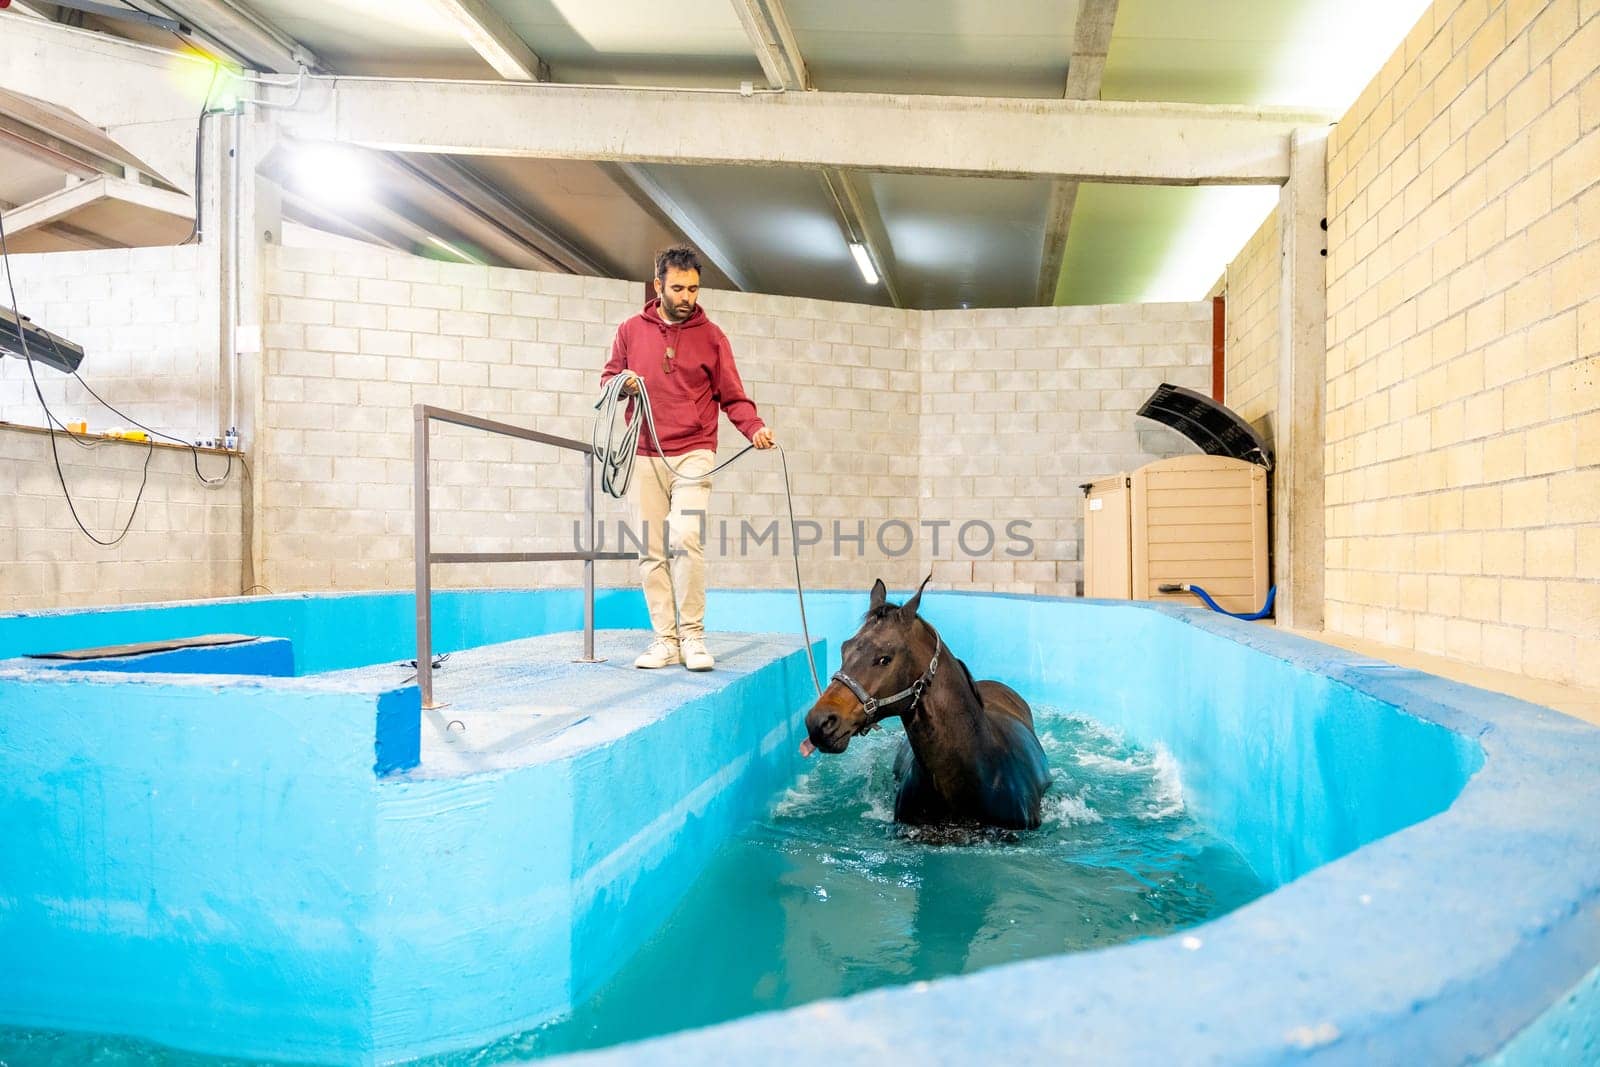 Rehabilitation center for animals after sportive injures with a pool for hydrotherapy